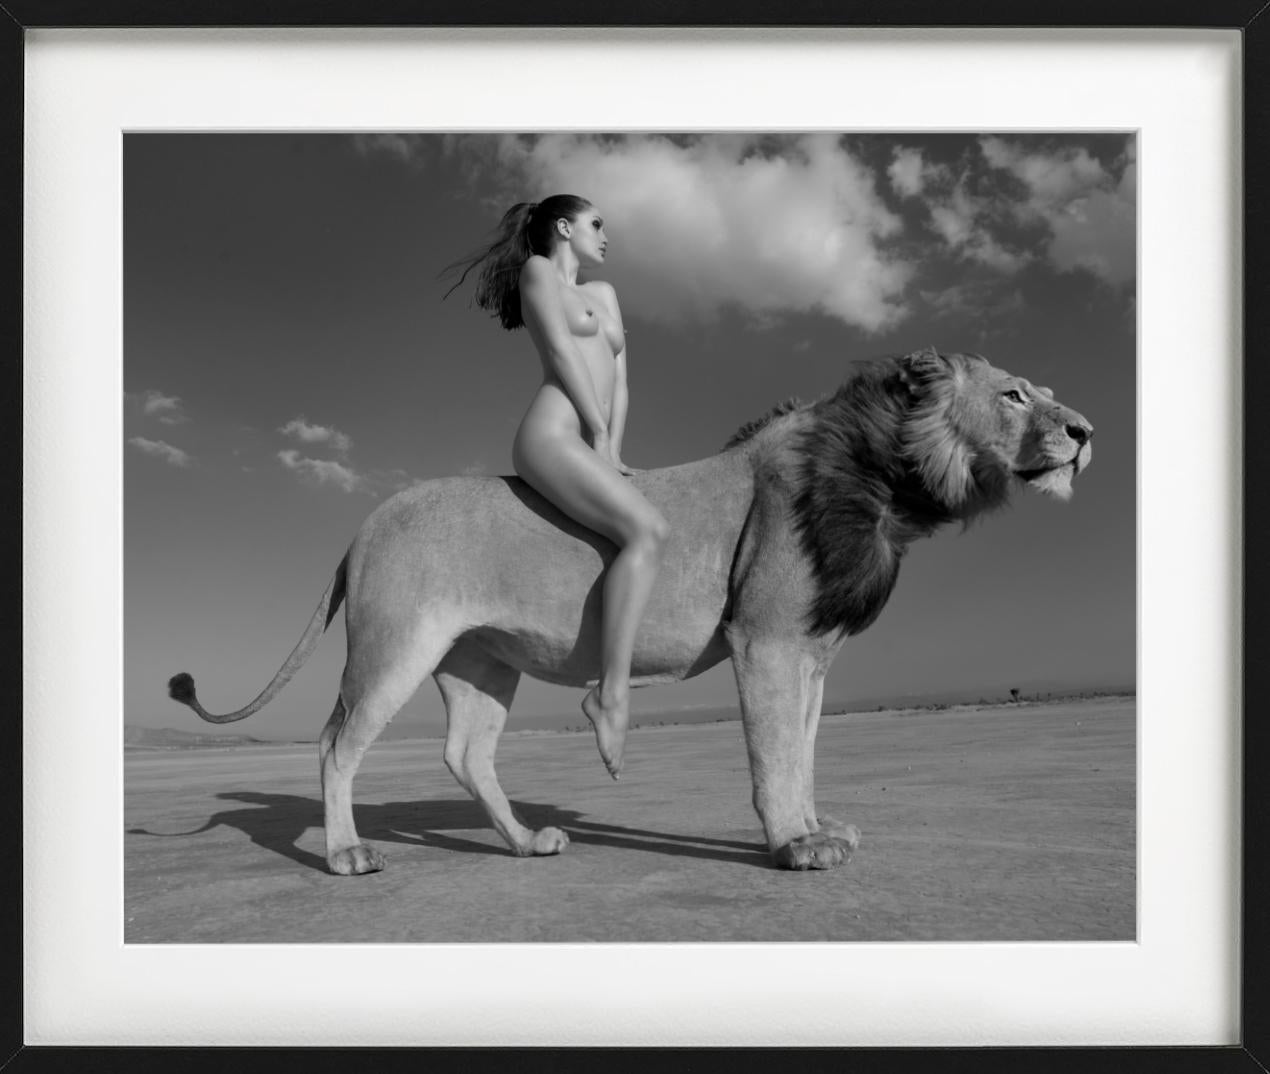 Angela rides the lion -  nude with lion in the desert, fine art photography 2008 - Contemporary Photograph by Sylvie Blum